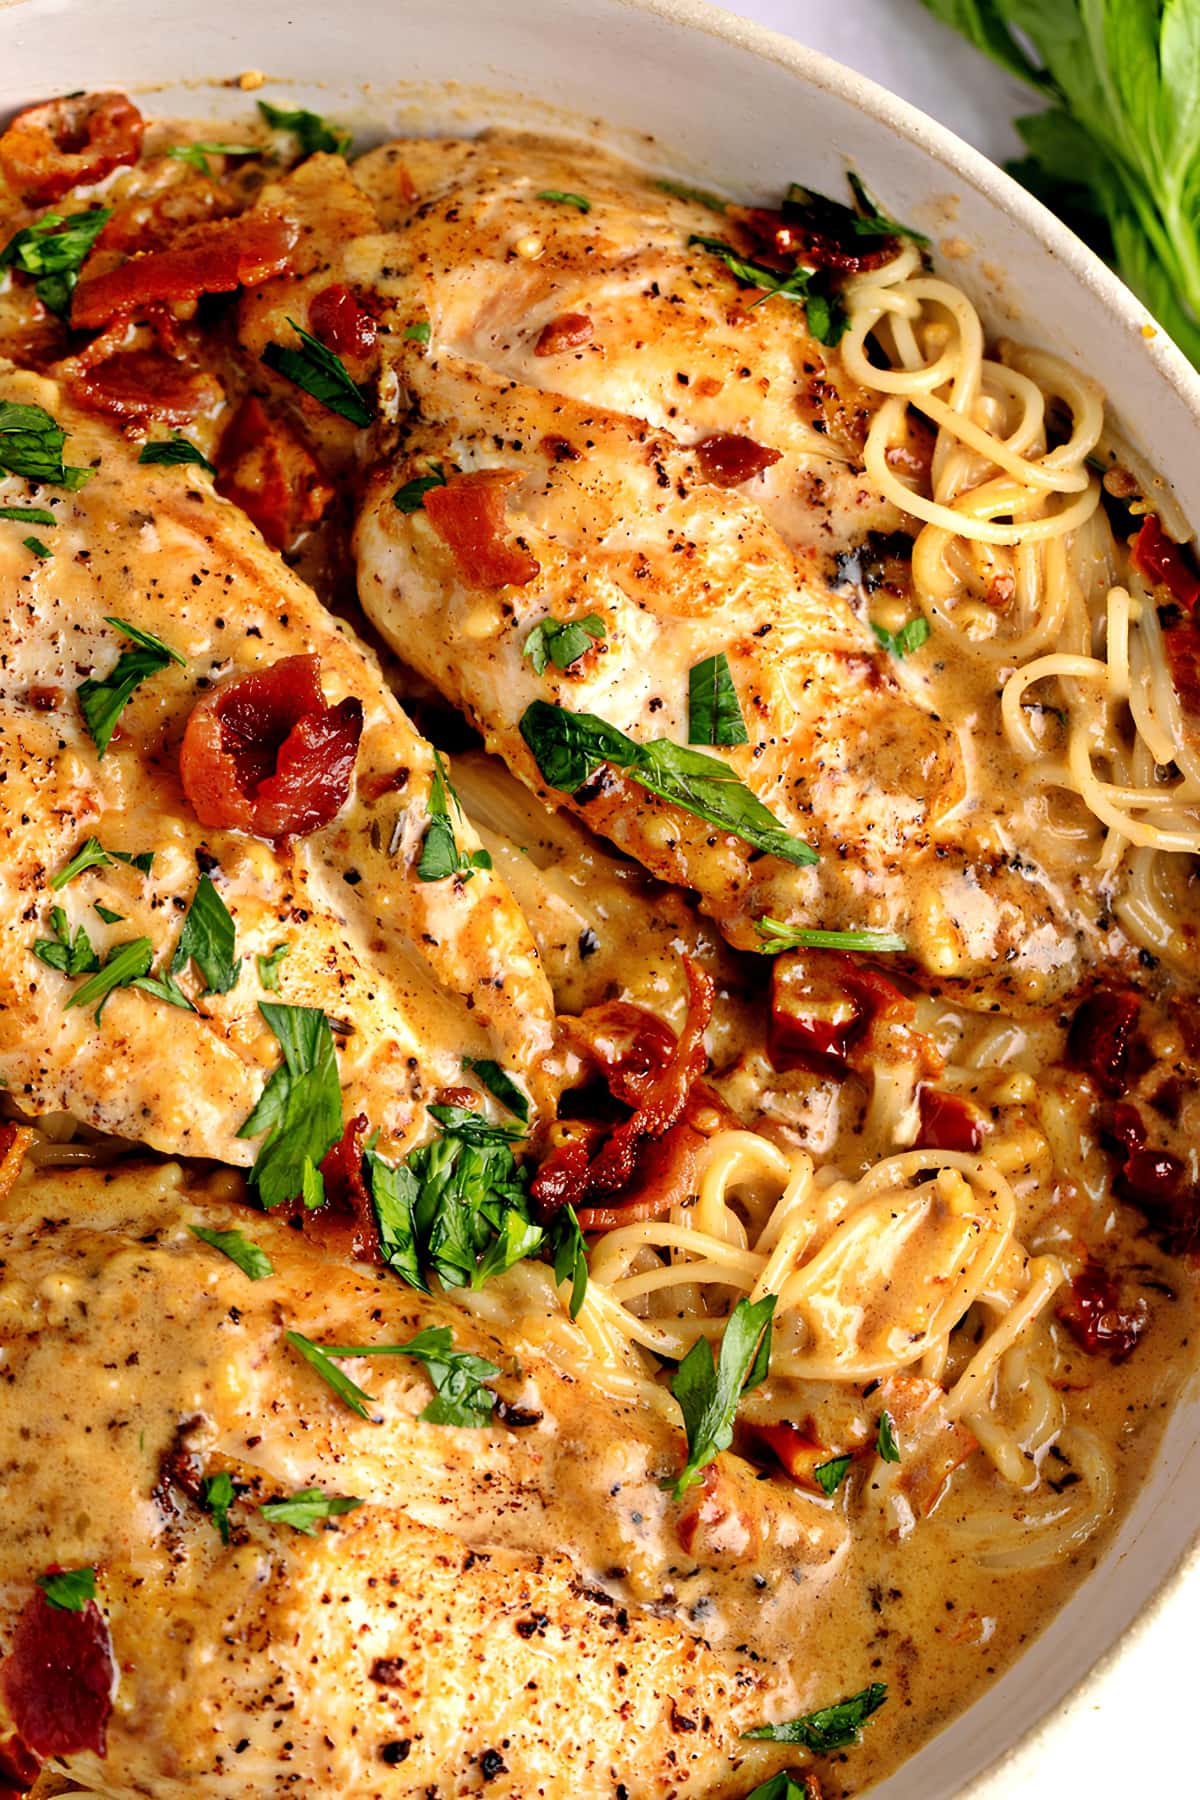 Creamy chicken breast cooked with pasta and sauce garnished with fried bacon bits.